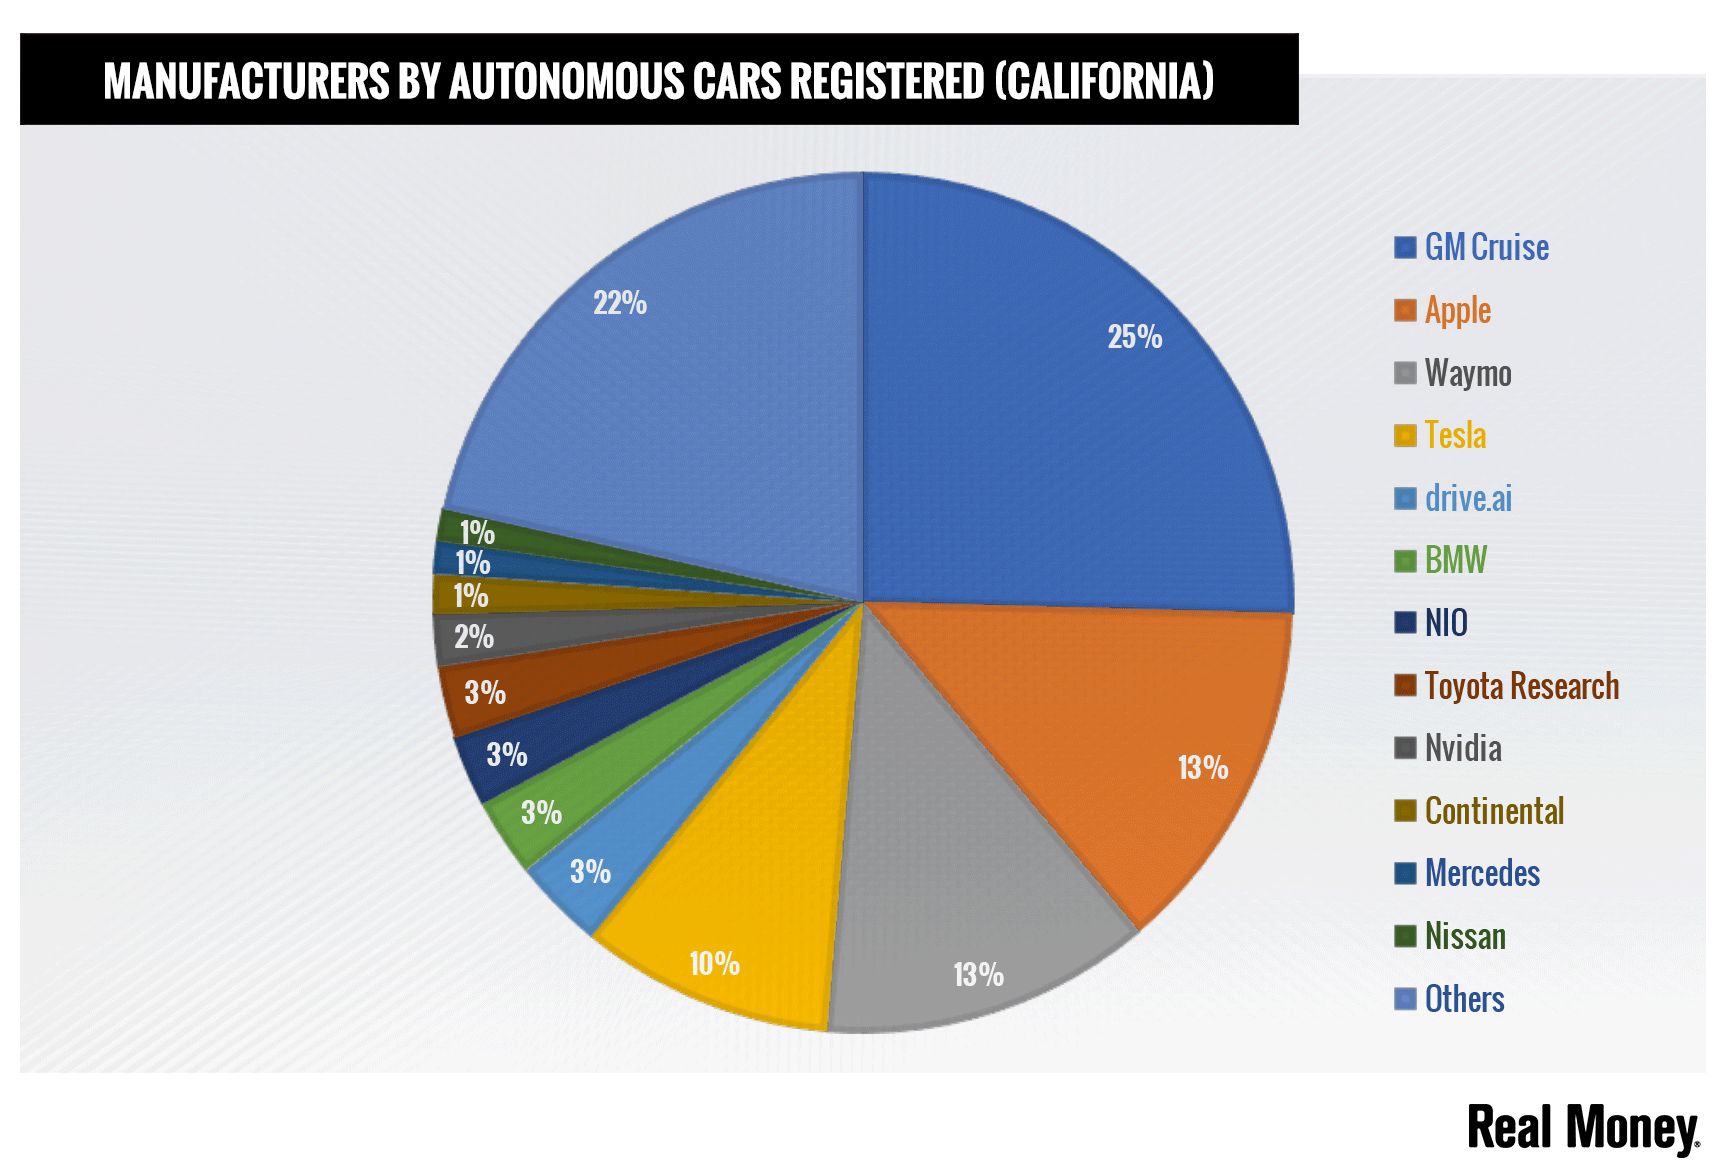 BMW and Mercedes from Daimler are on the list of autonomous car manufacturers in California.